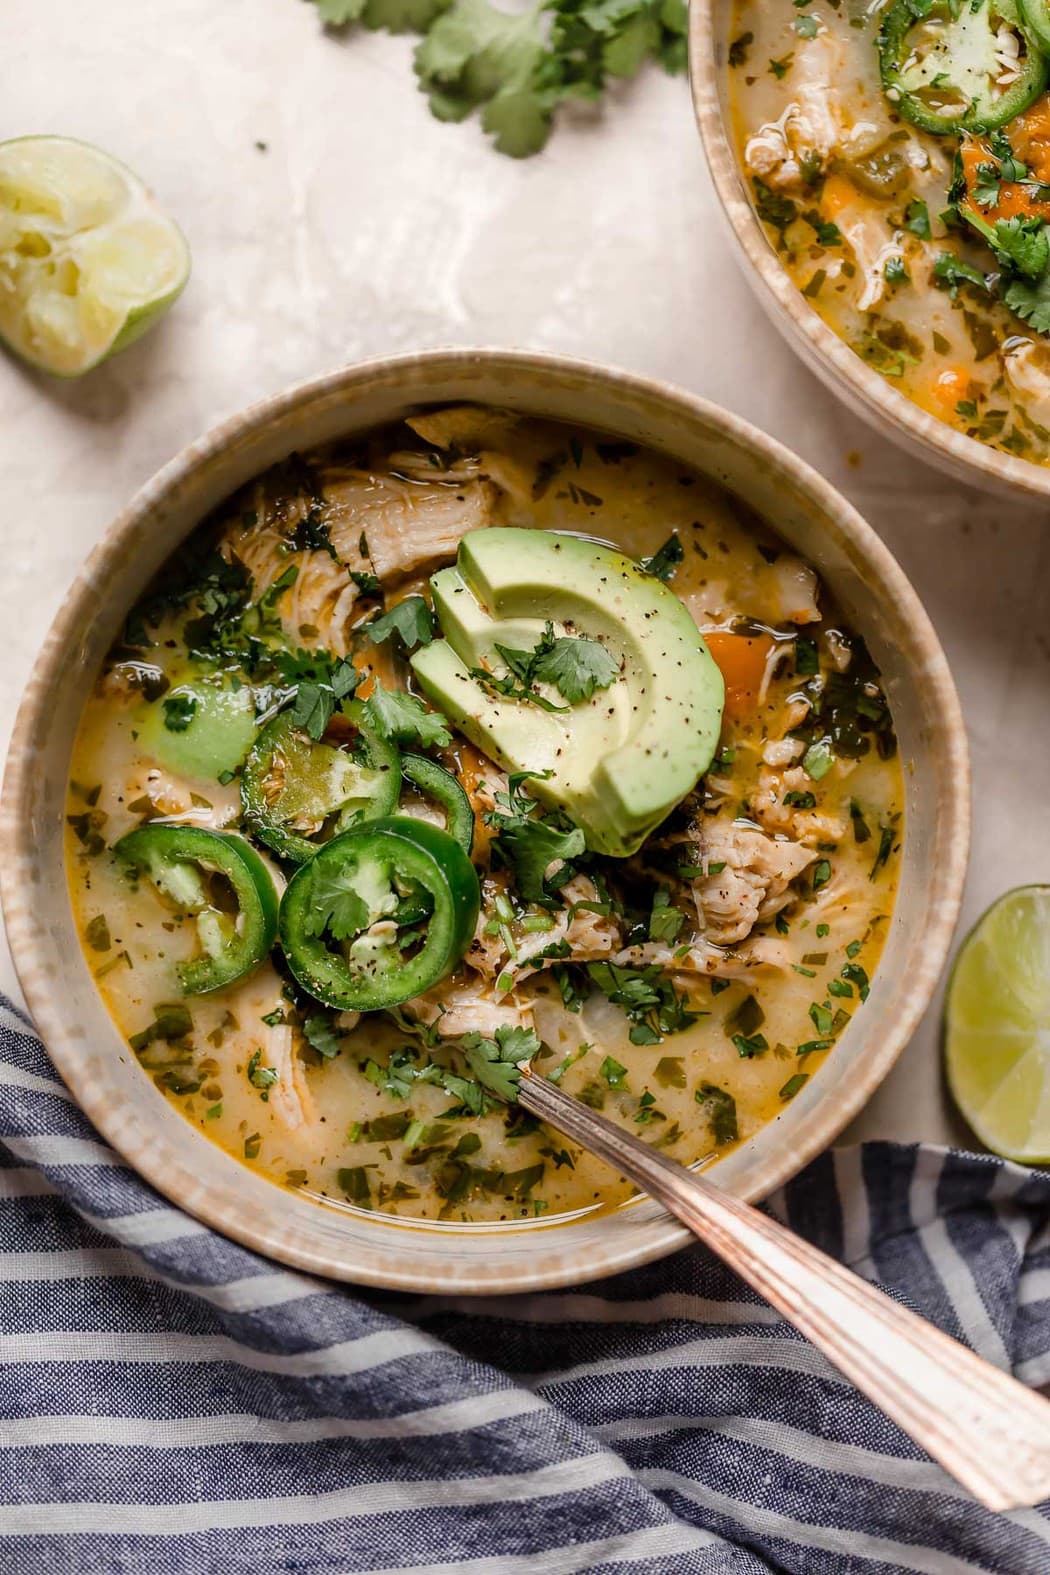 https://therealfooddietitians.com/wp-content/uploads/2021/09/WEB-Instant-Pot-White-Chicken-Chili-Finals-10-1.jpg